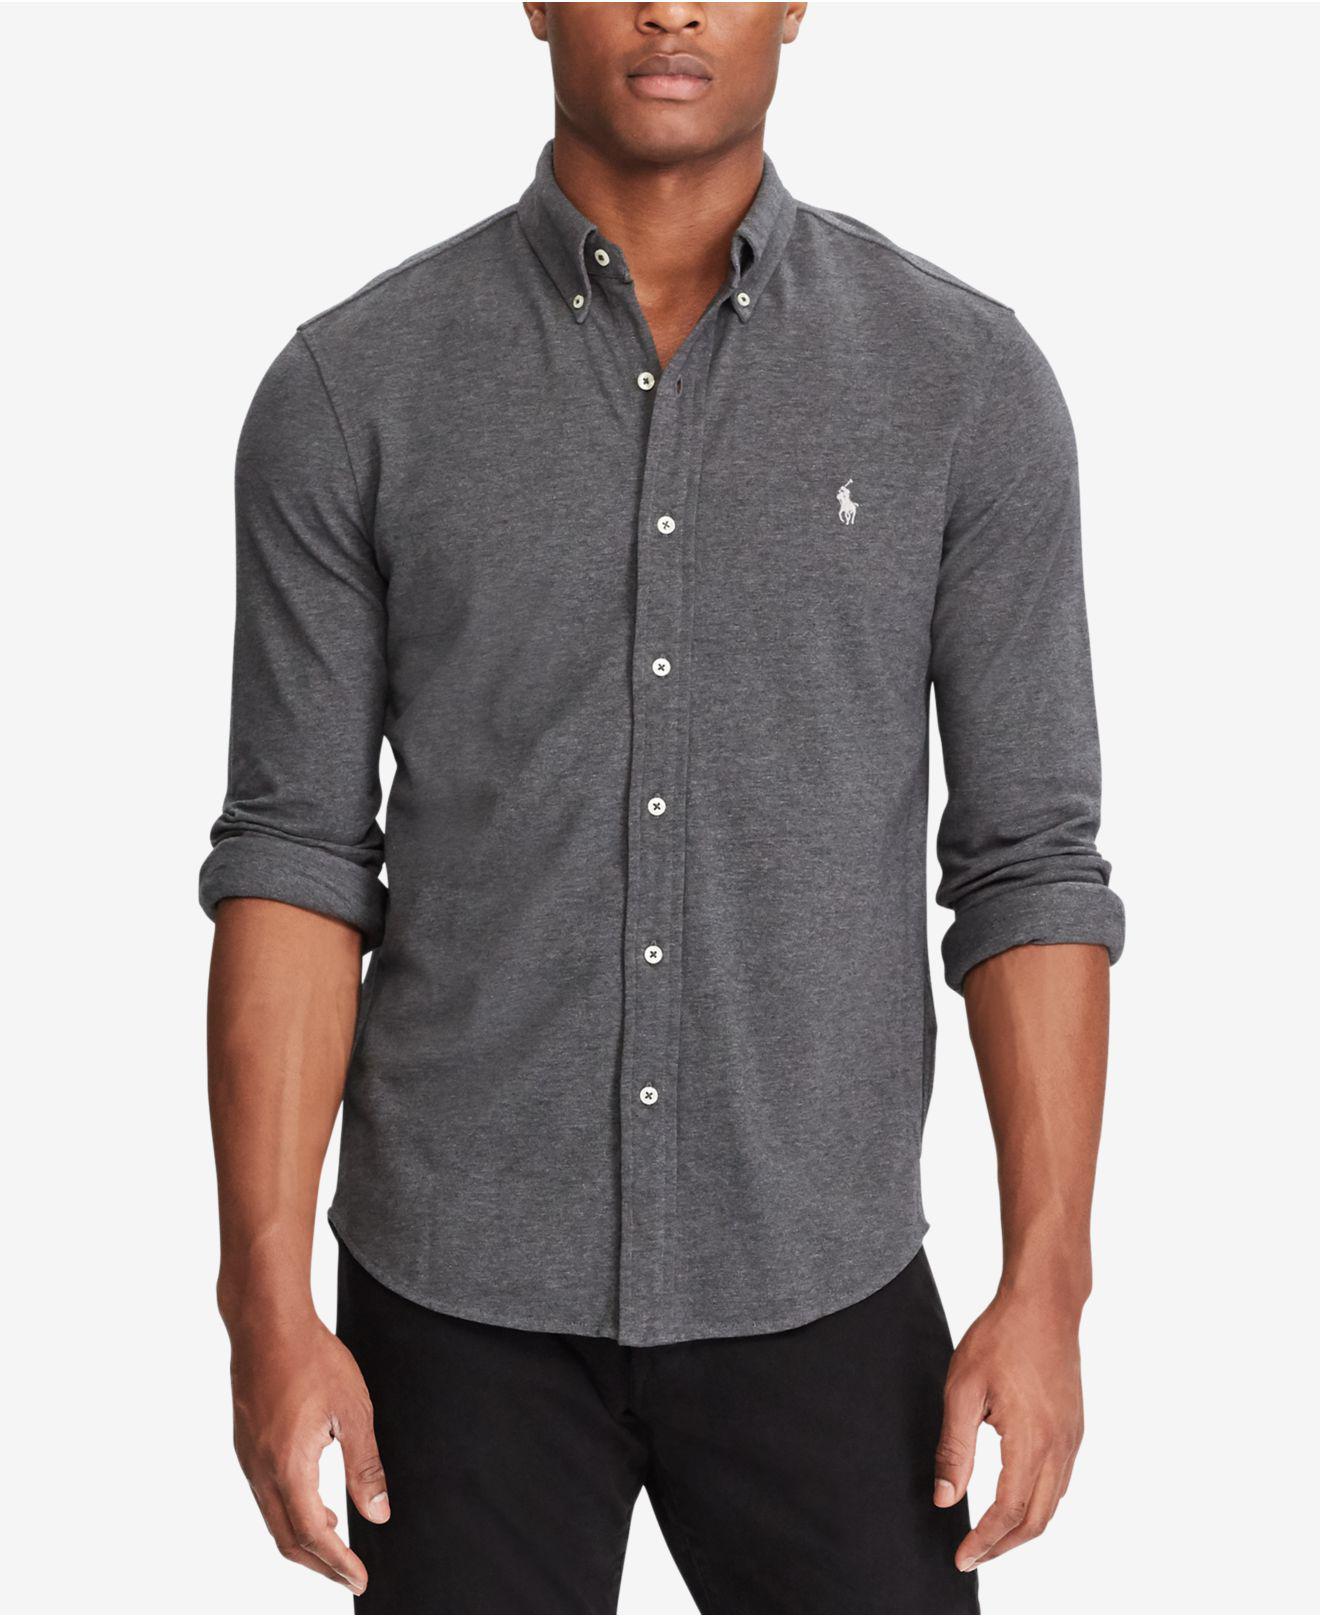 Classic Fit Cotton Mesh Shirt in Grey 